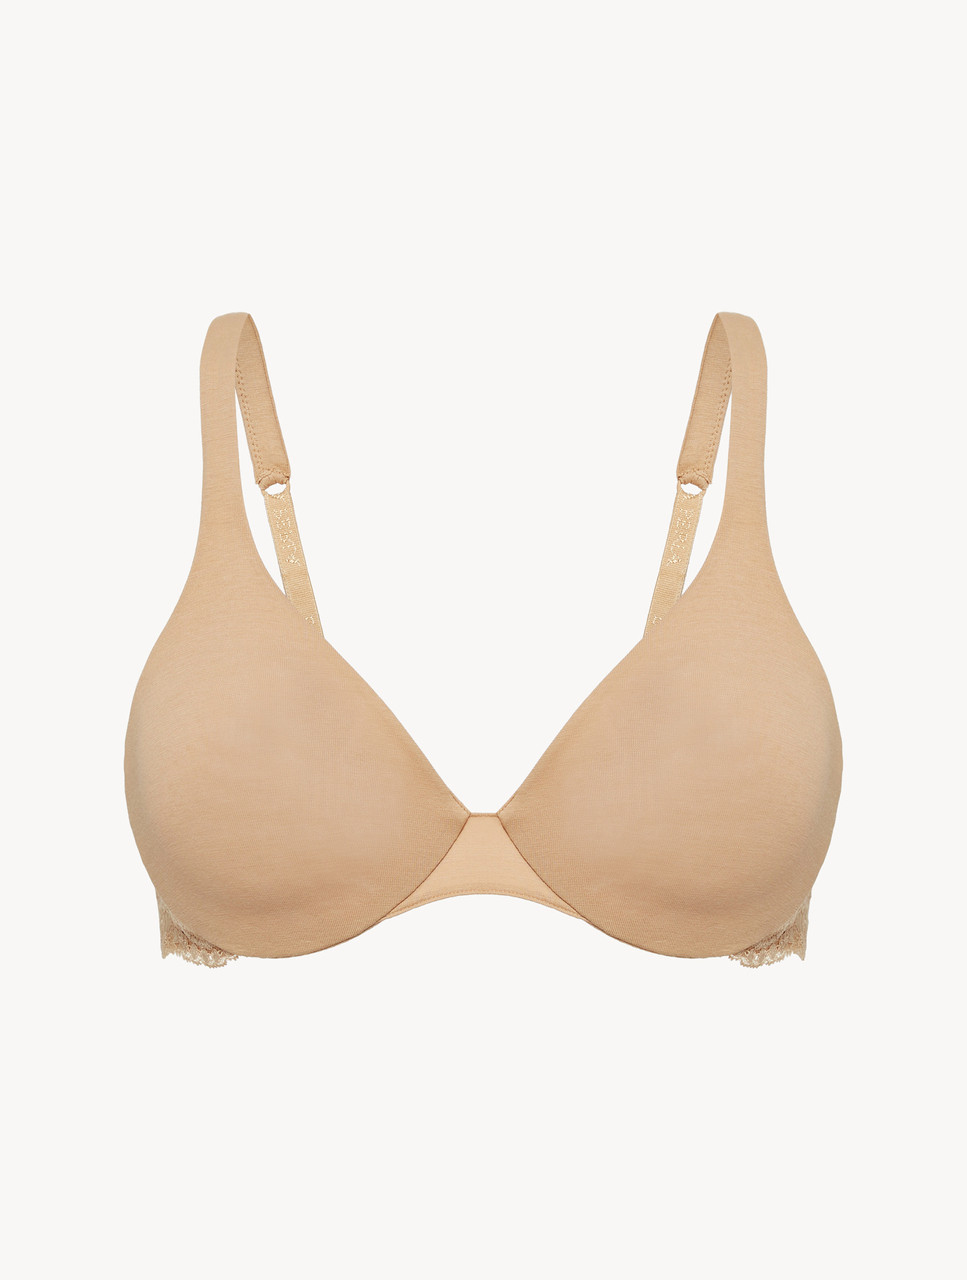 Nude lace and cotton underwired bra